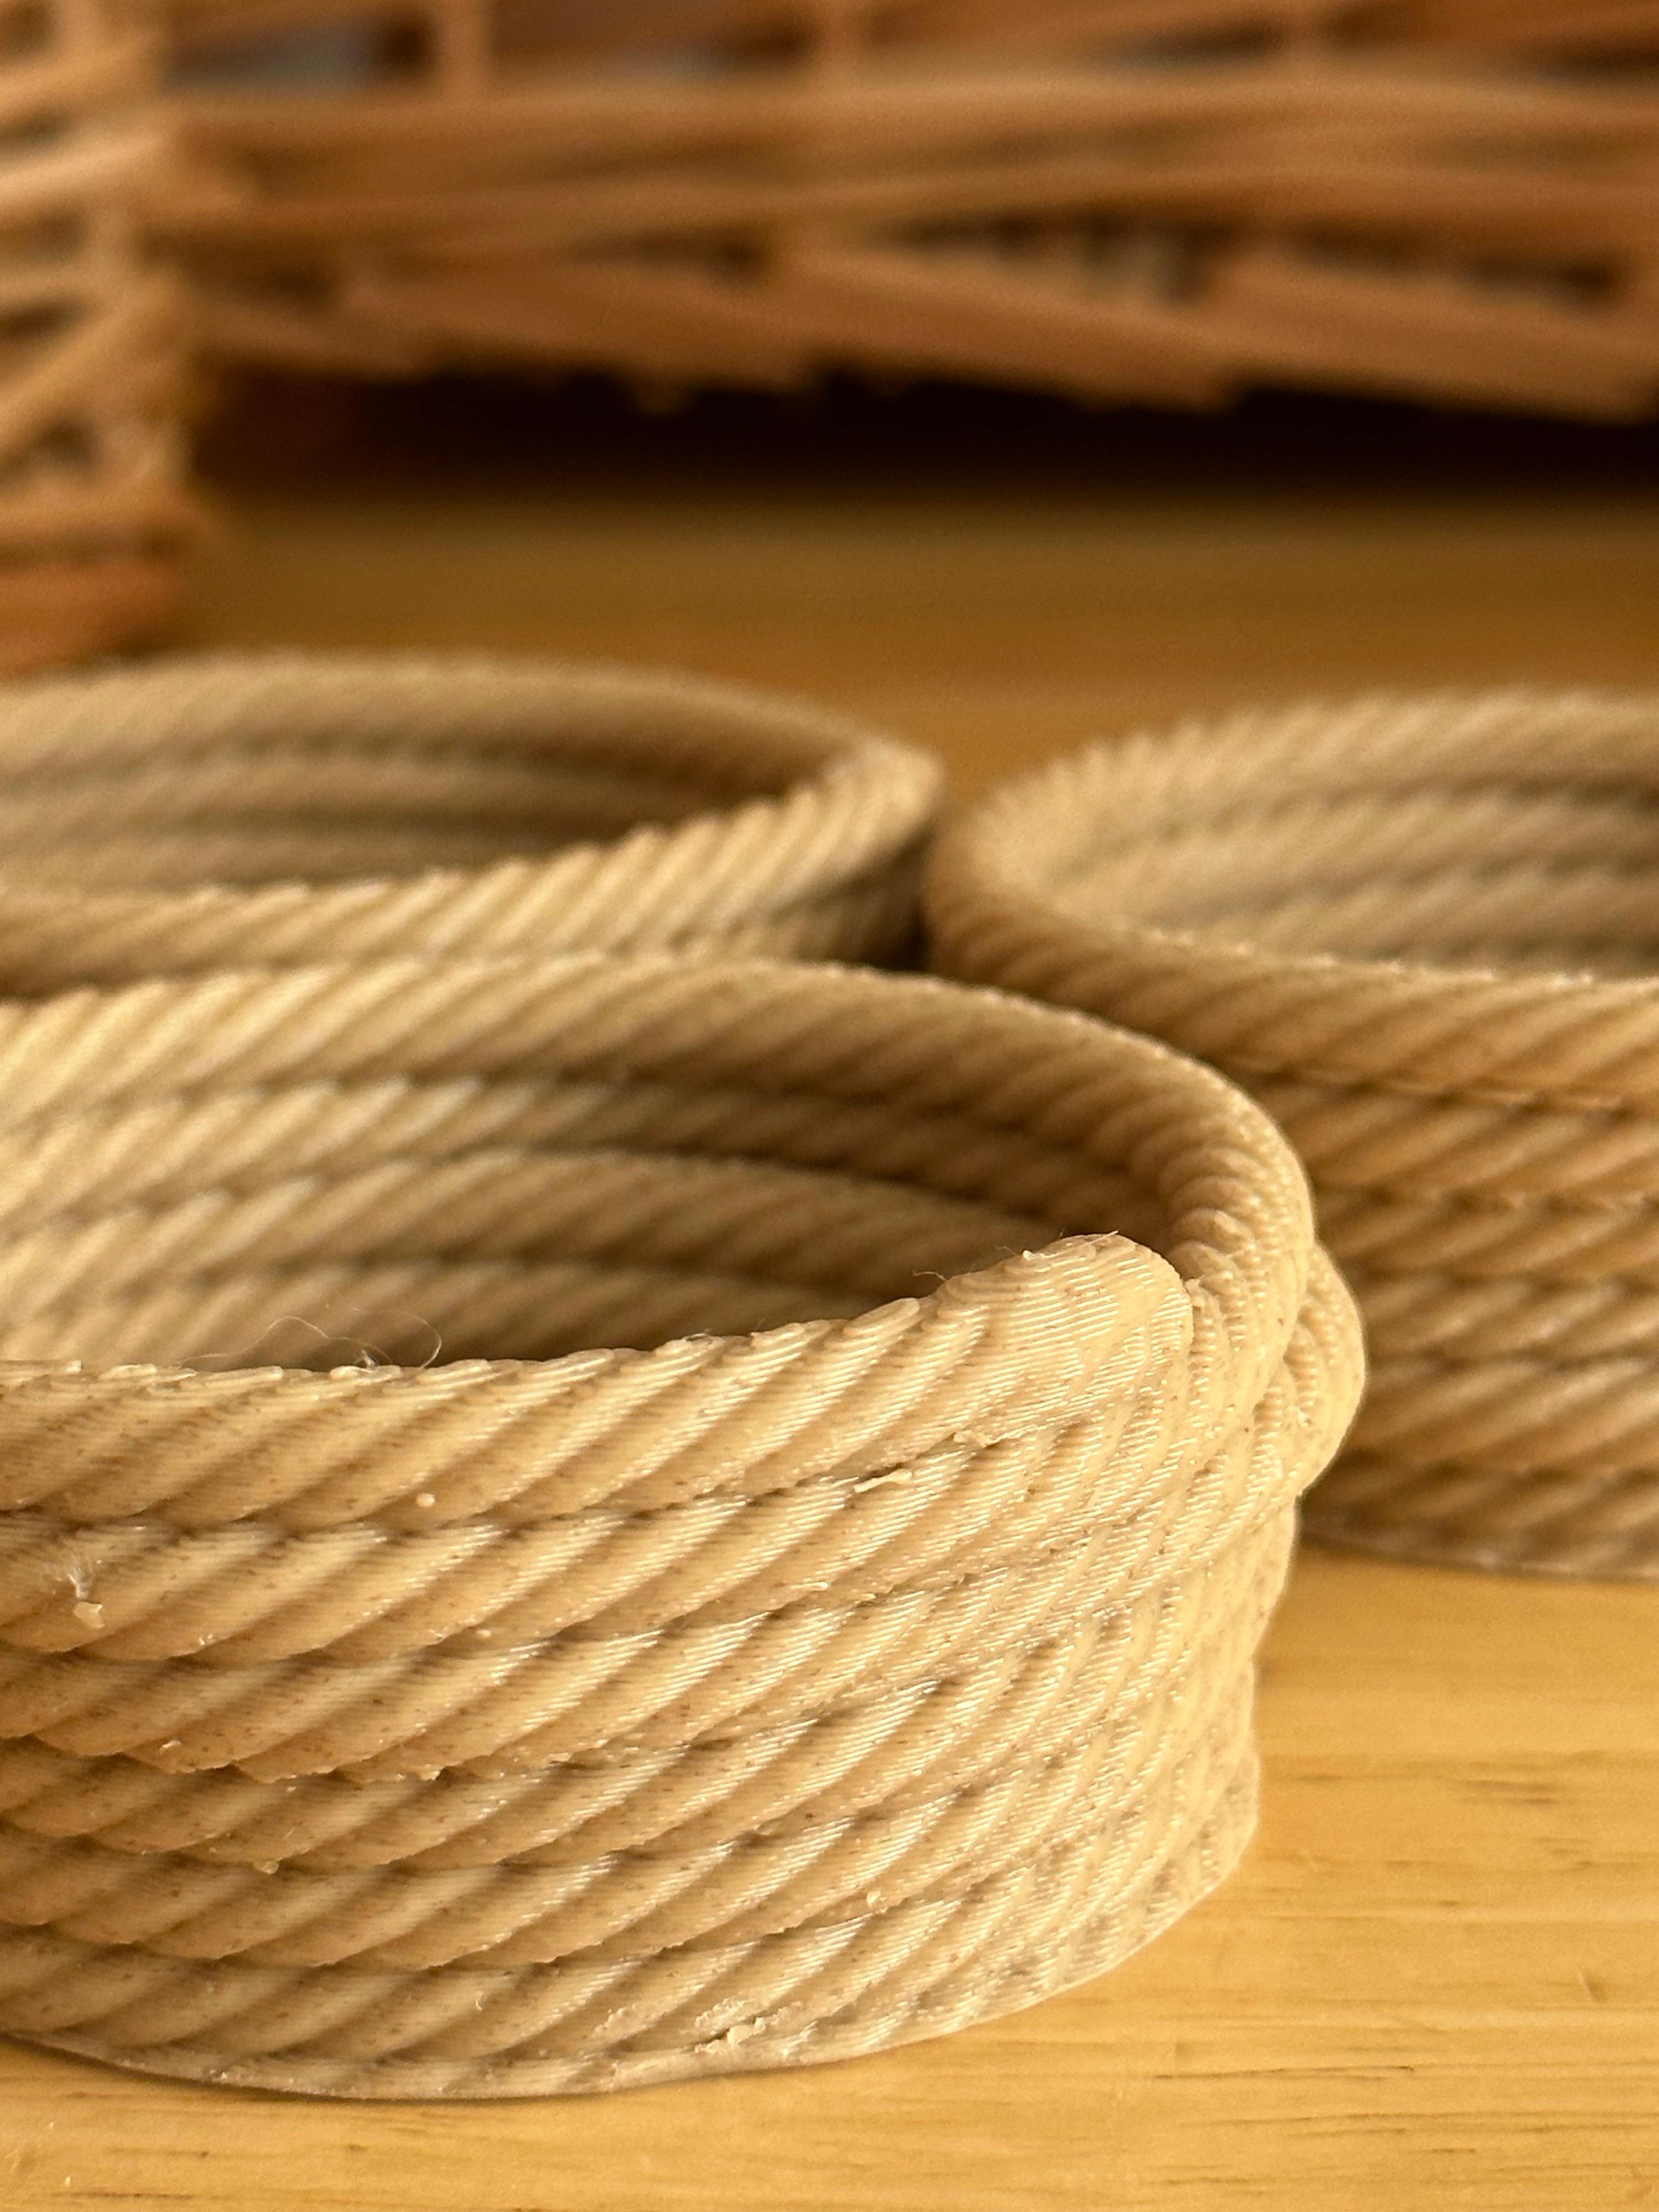 Sloppy Coiled Rope Bowls 3d model